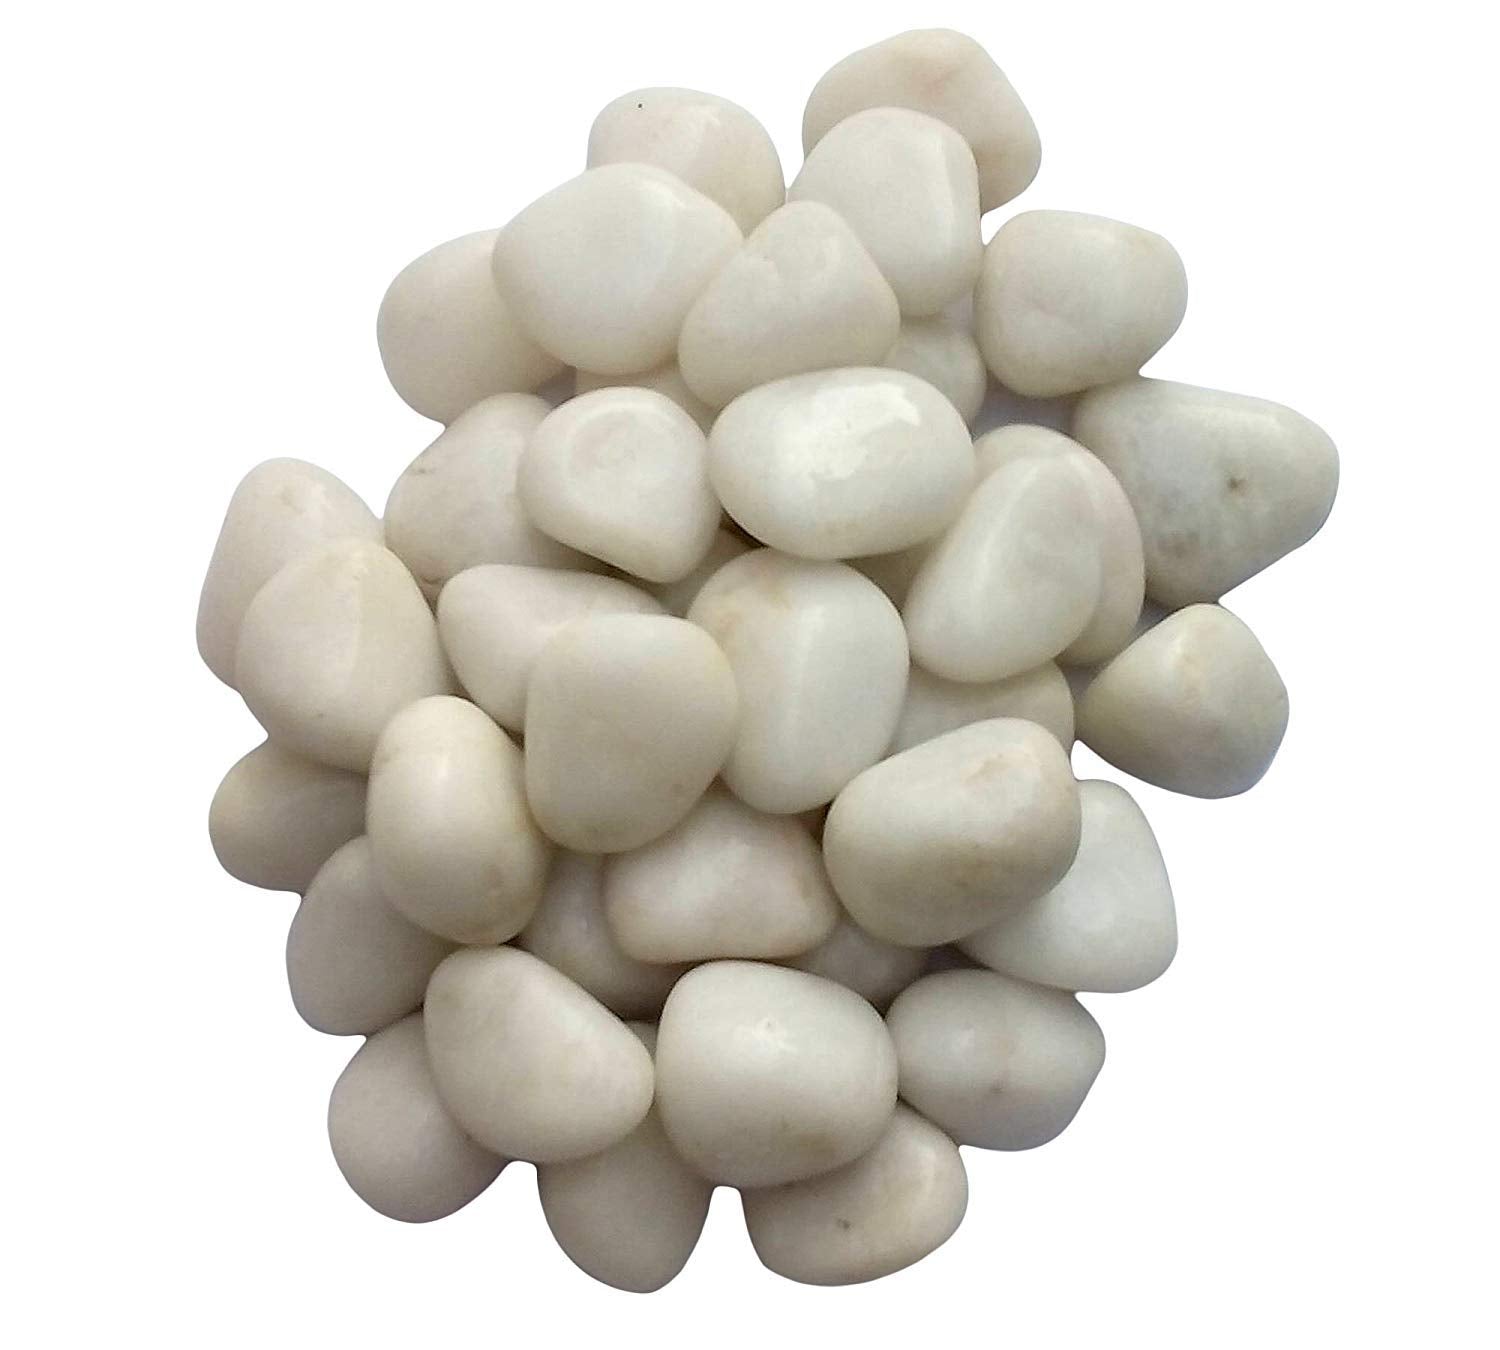 Pebbles Glossy Home Decorative Vase Fillers Stone White, 2 KG